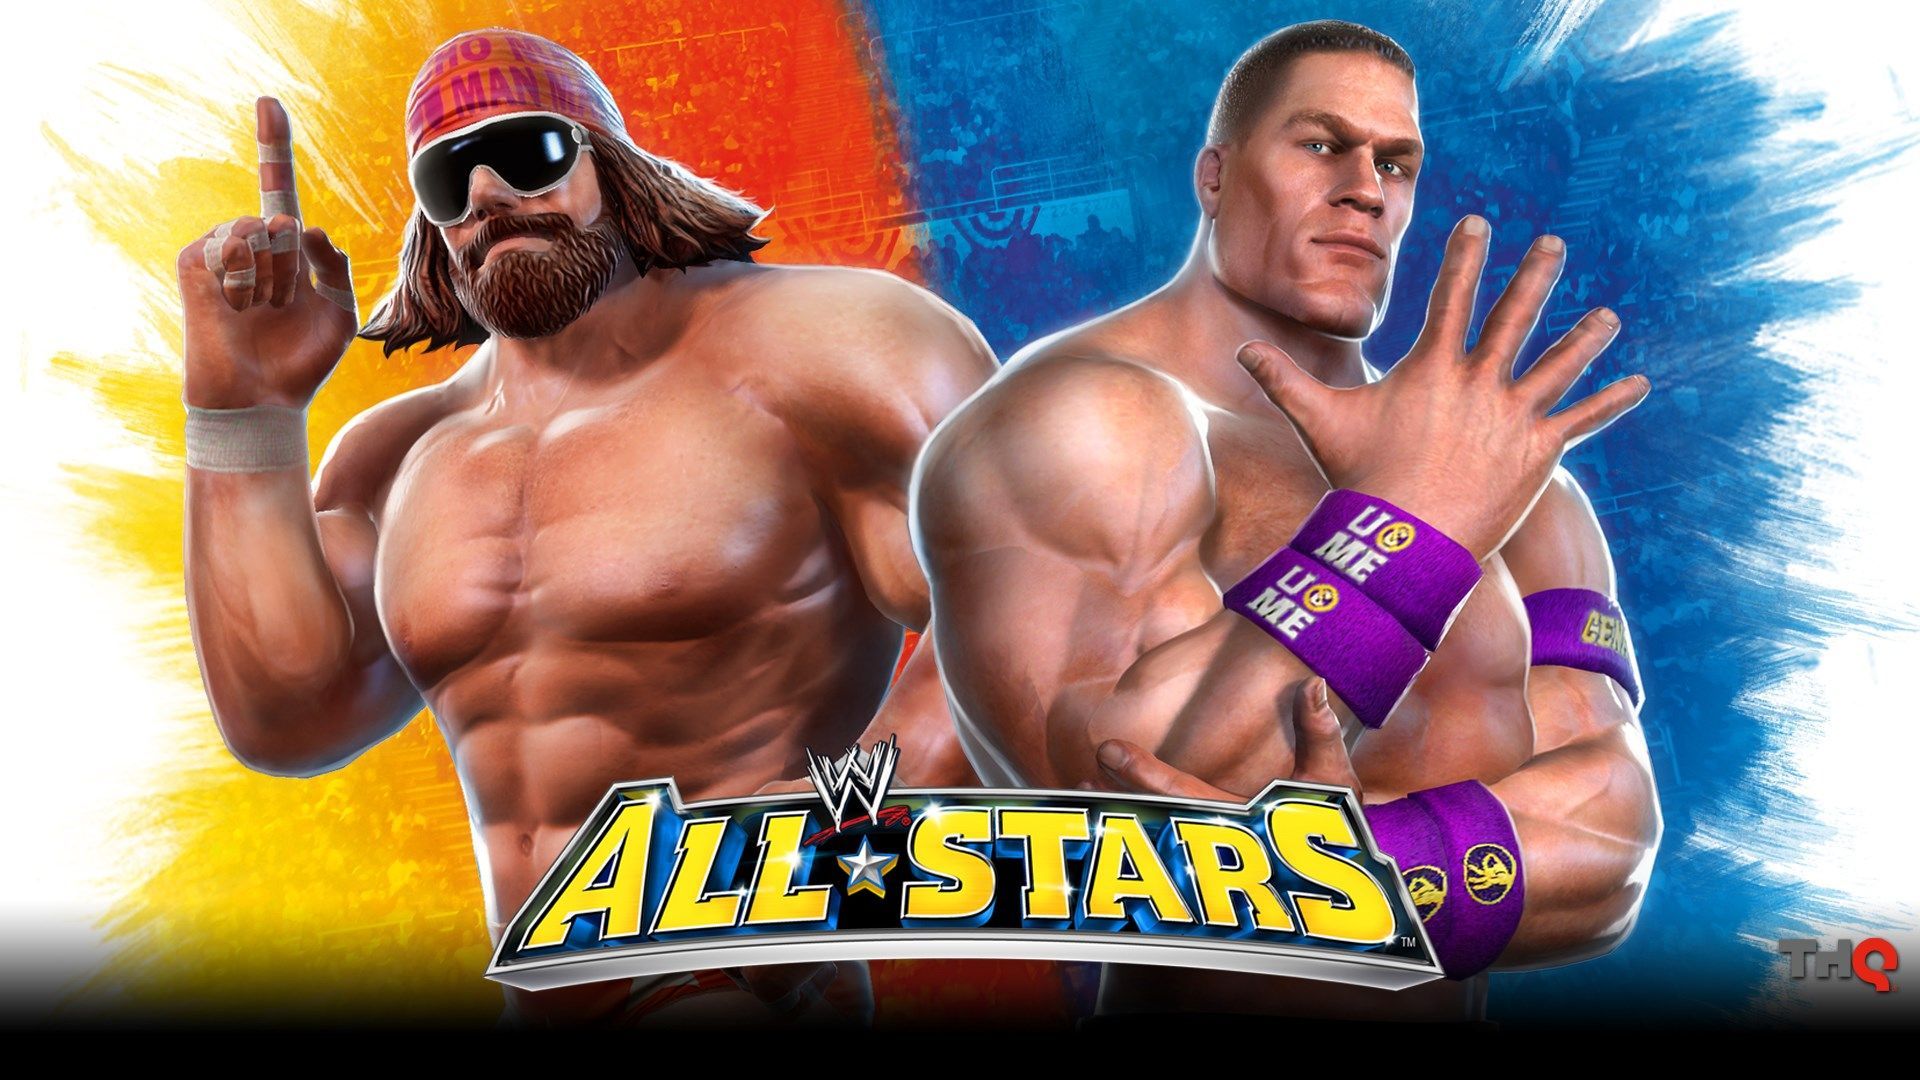 wwe all stars, High Definition Background. All star, Wwe, Star games